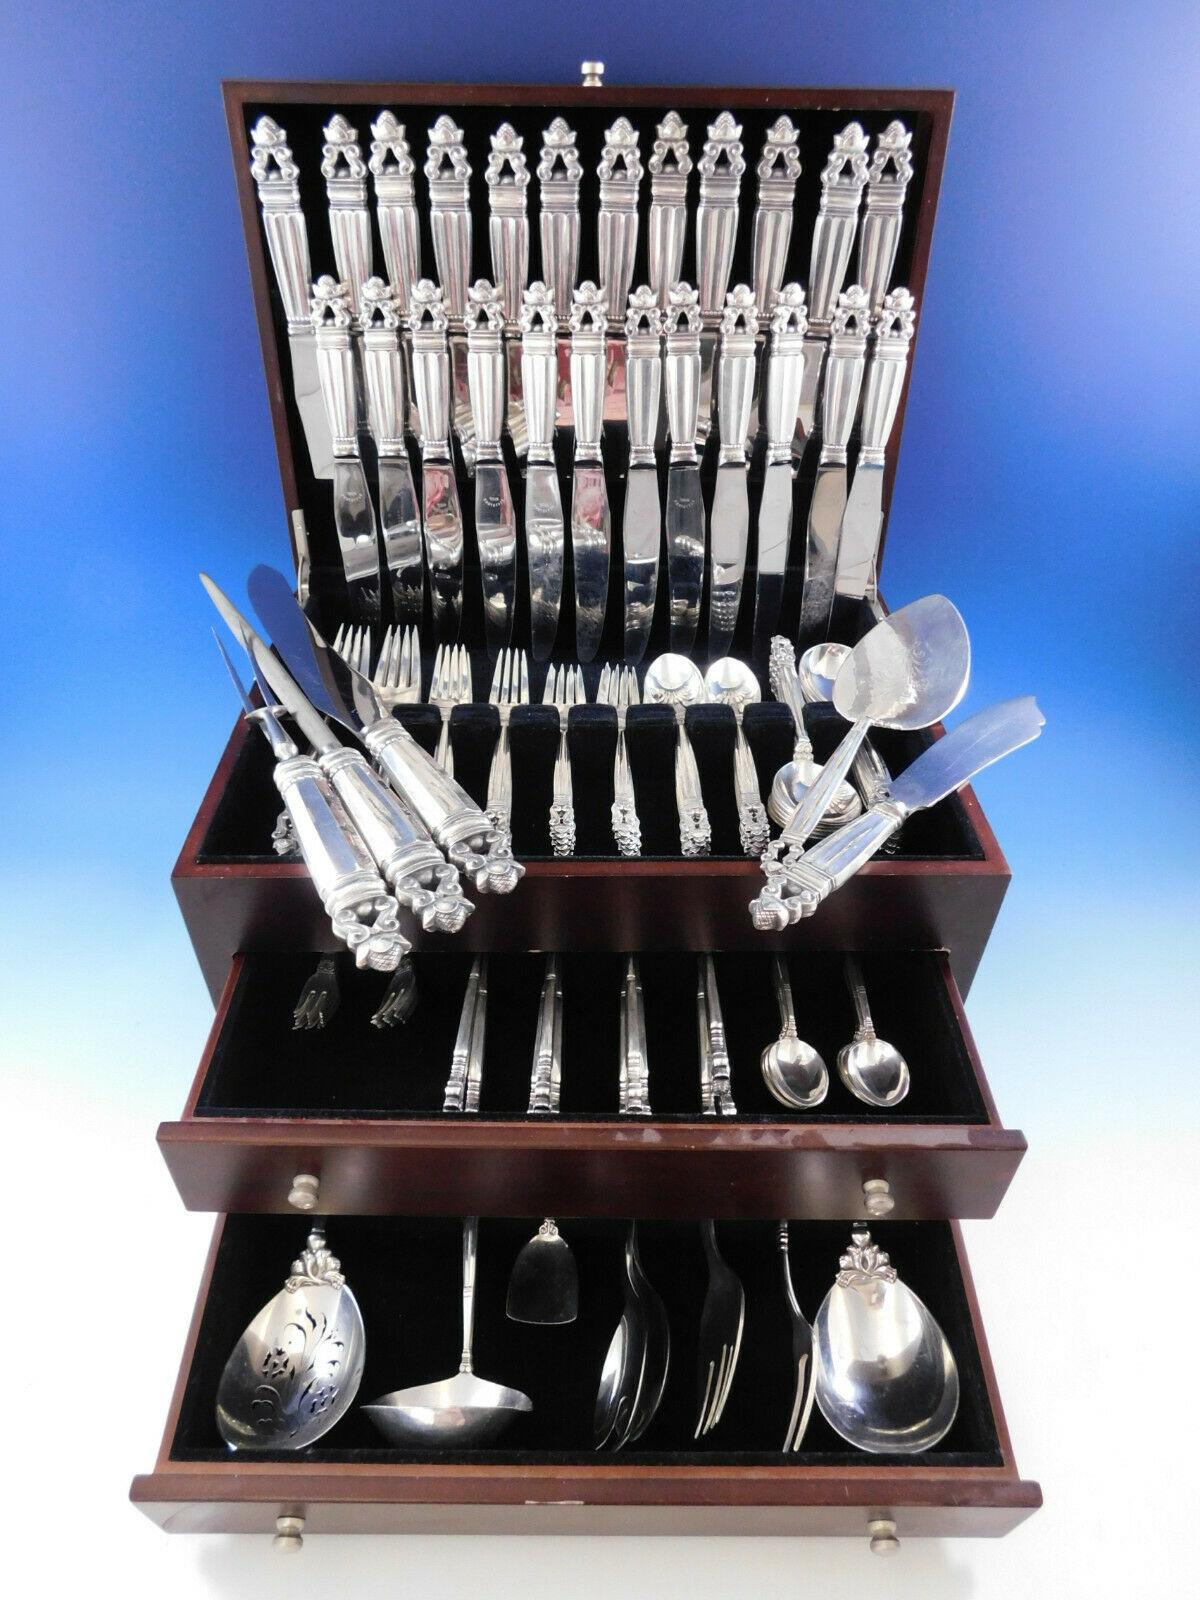 Monumental Acorn by Georg Jensen Sterling Silver Dinner Size Flatware set - 134 pieces including extra large dinner knives and extra large dinner forks. This set includes:

12 extra large dinner knives, 9 7/8